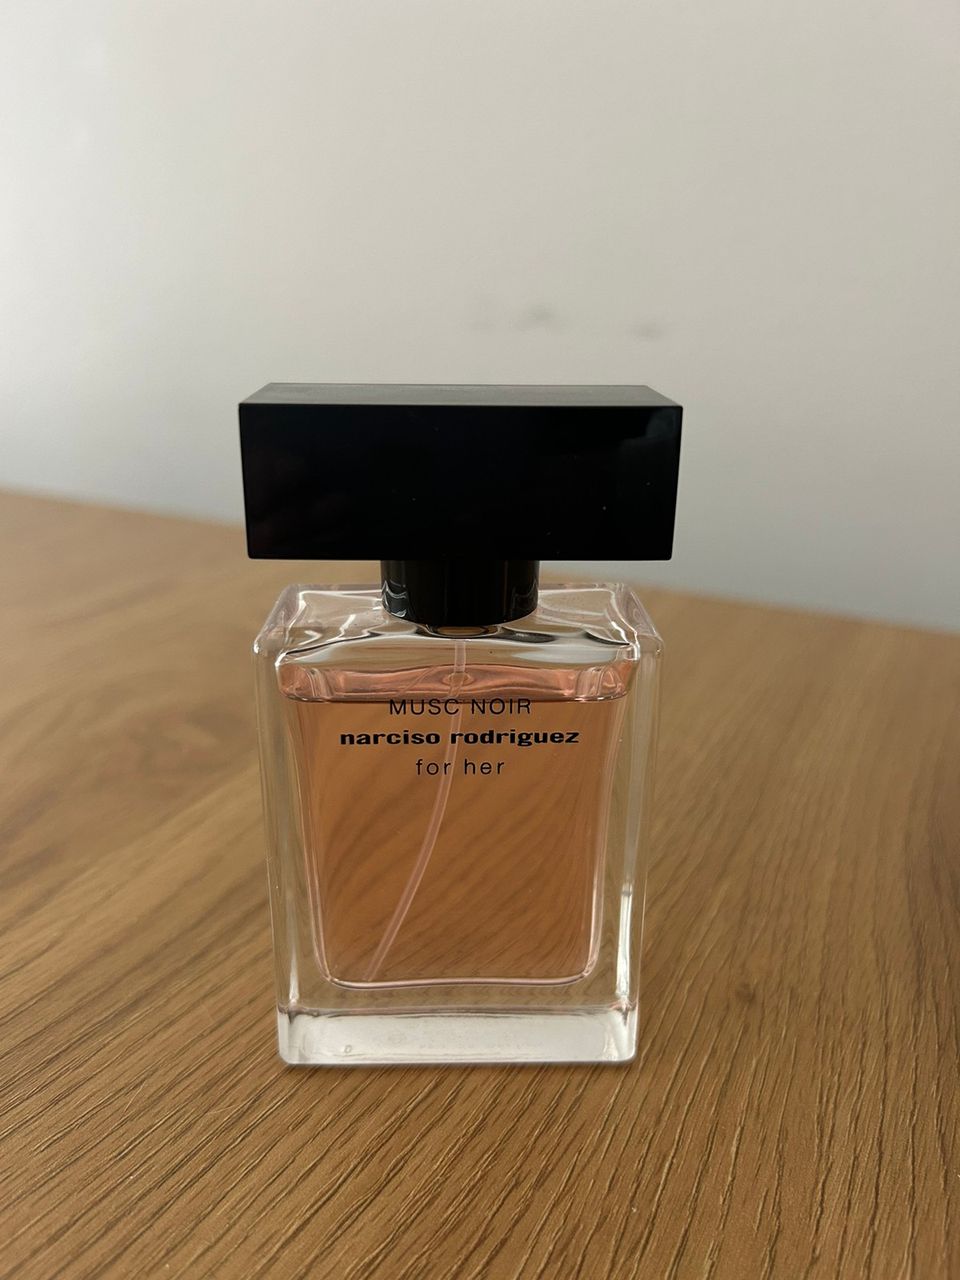 Narciso Rodrigues Musc Noir for Her hajuvesi 30ml